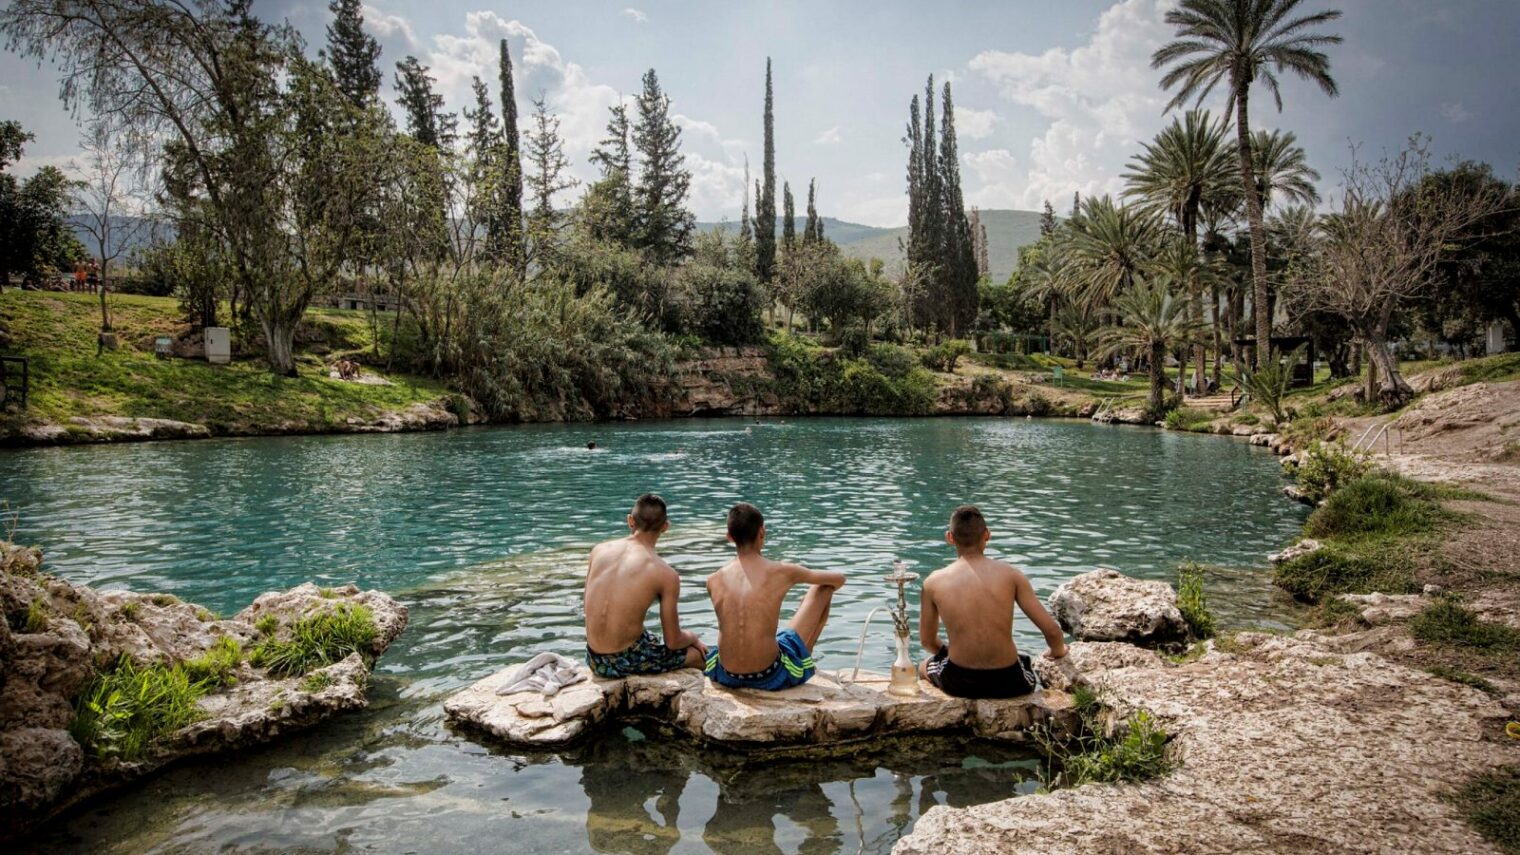 Because there are cool rivers to swim in on hot days. A view of the Yardenit River in northern Israel. Photo by Yaakov Lederman/FLASH90